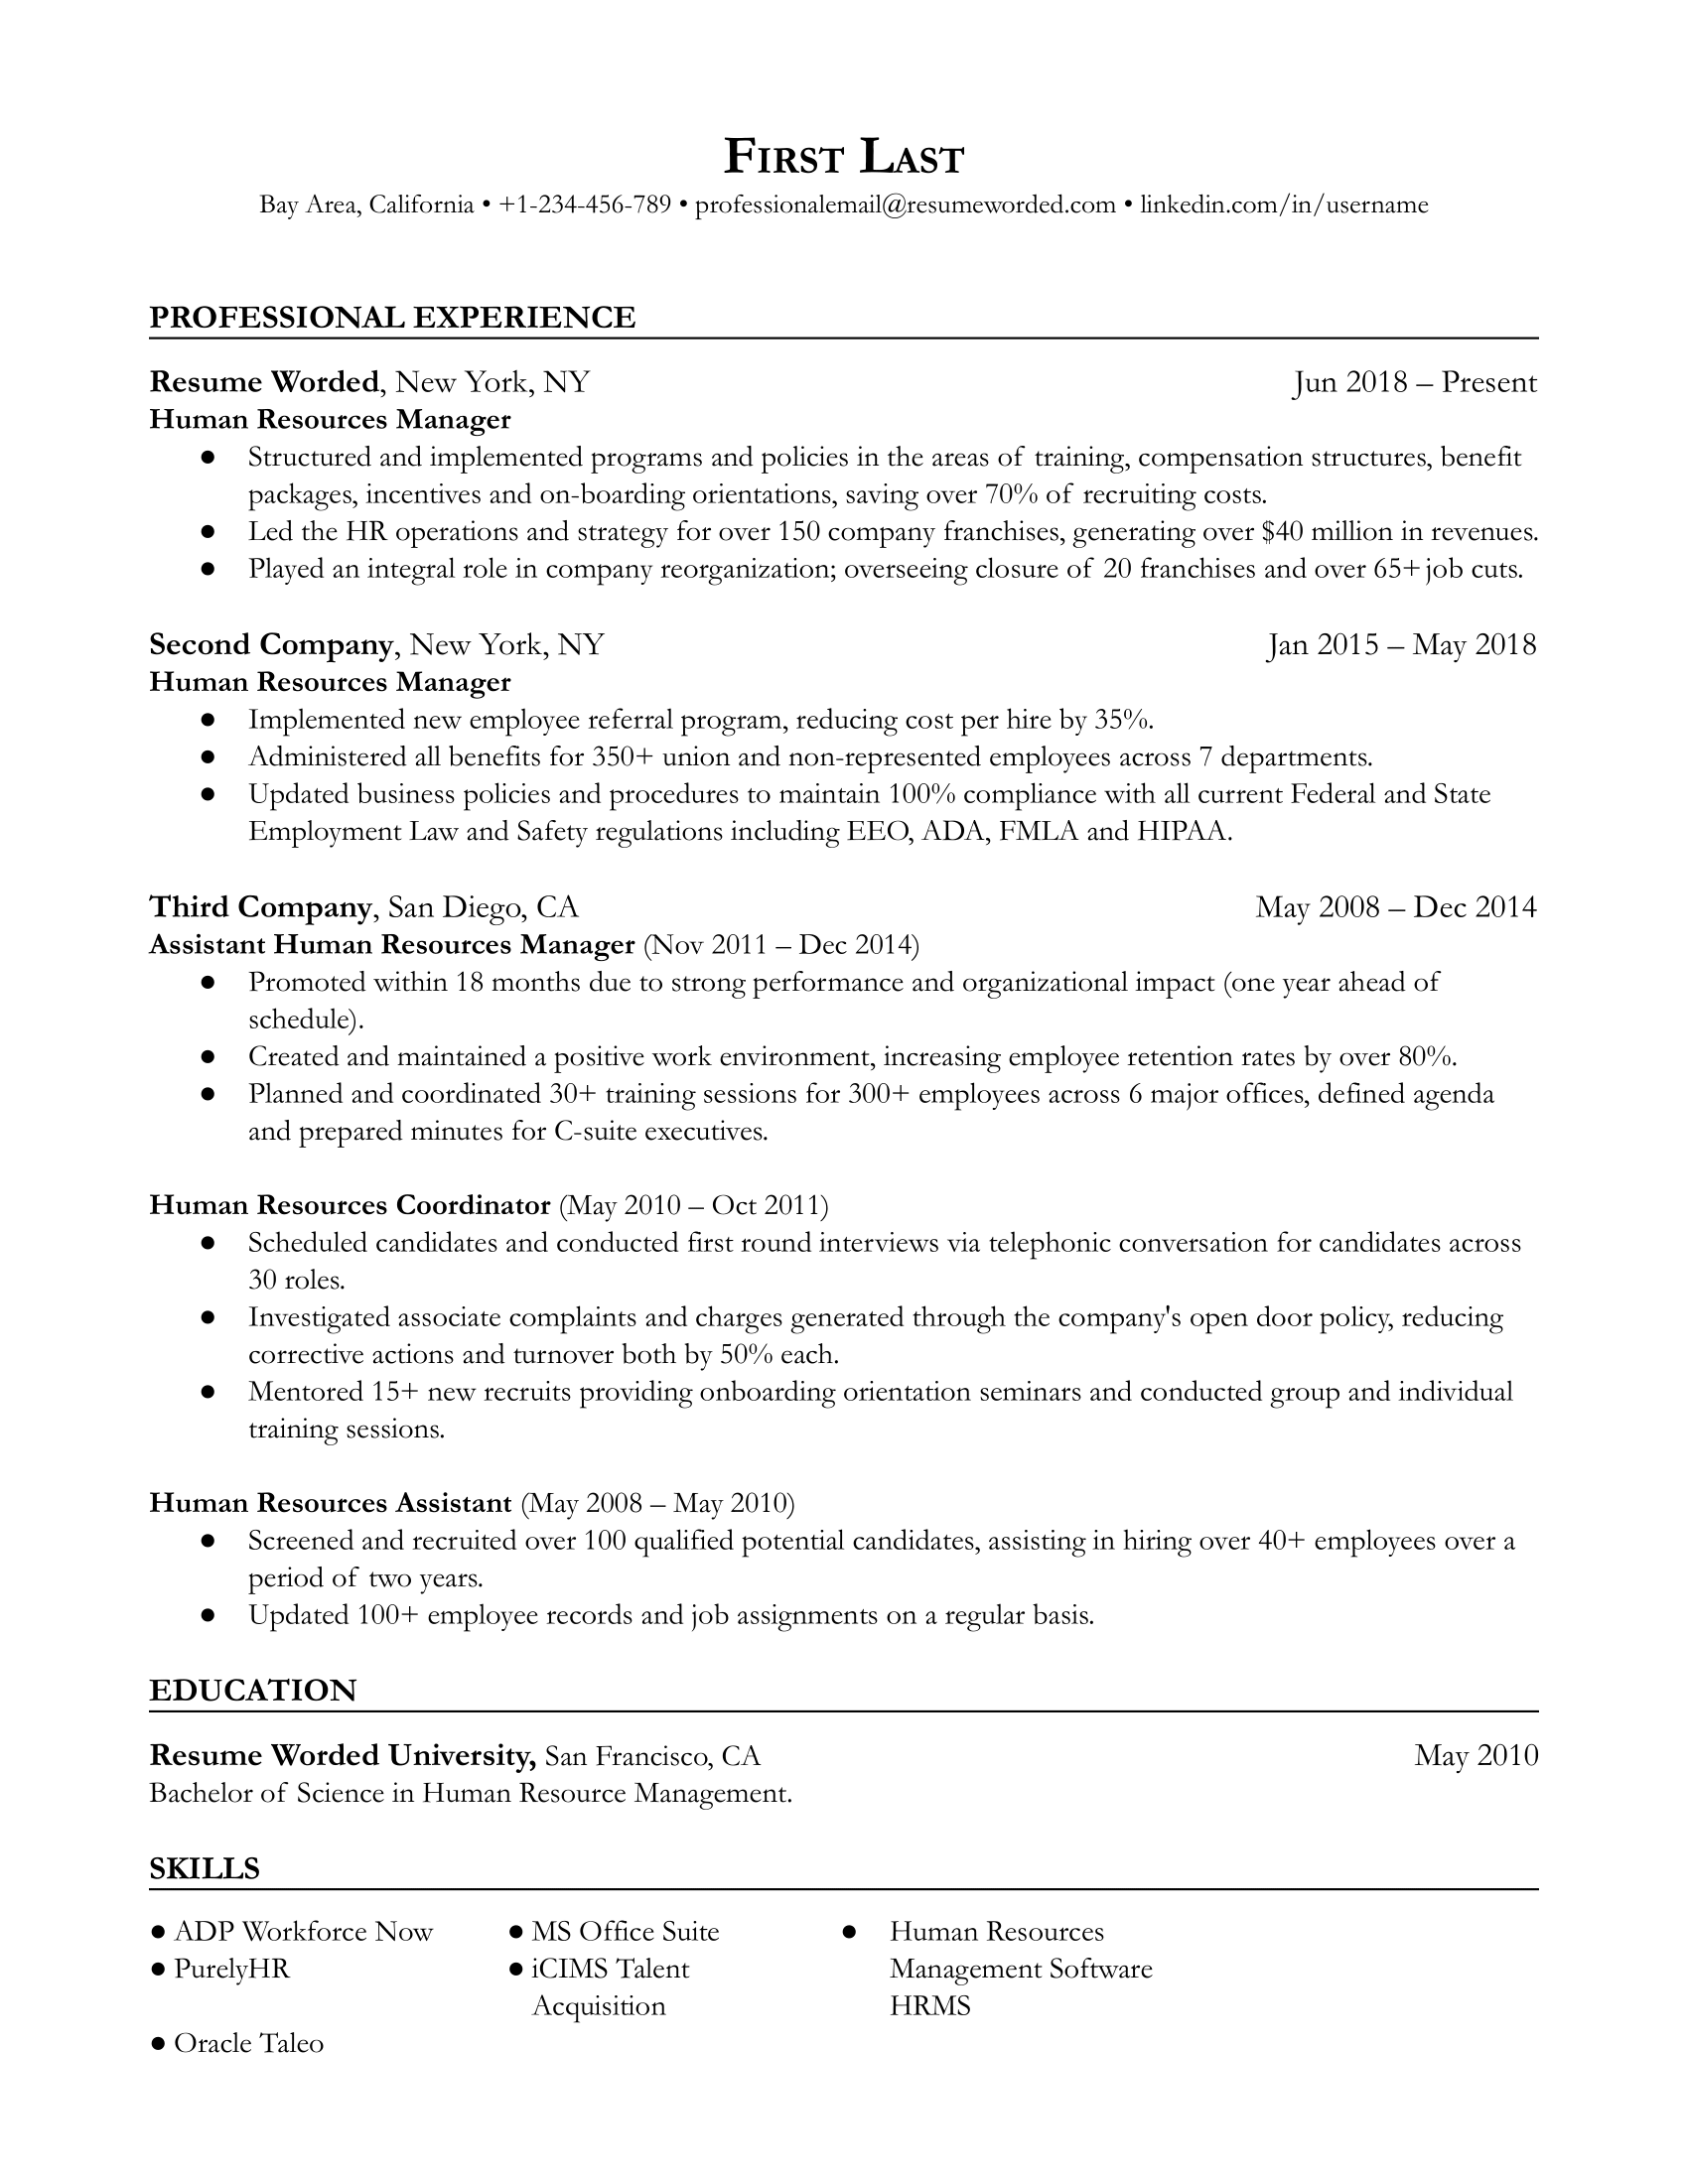 Human resources manager resume with past promotions and work experience